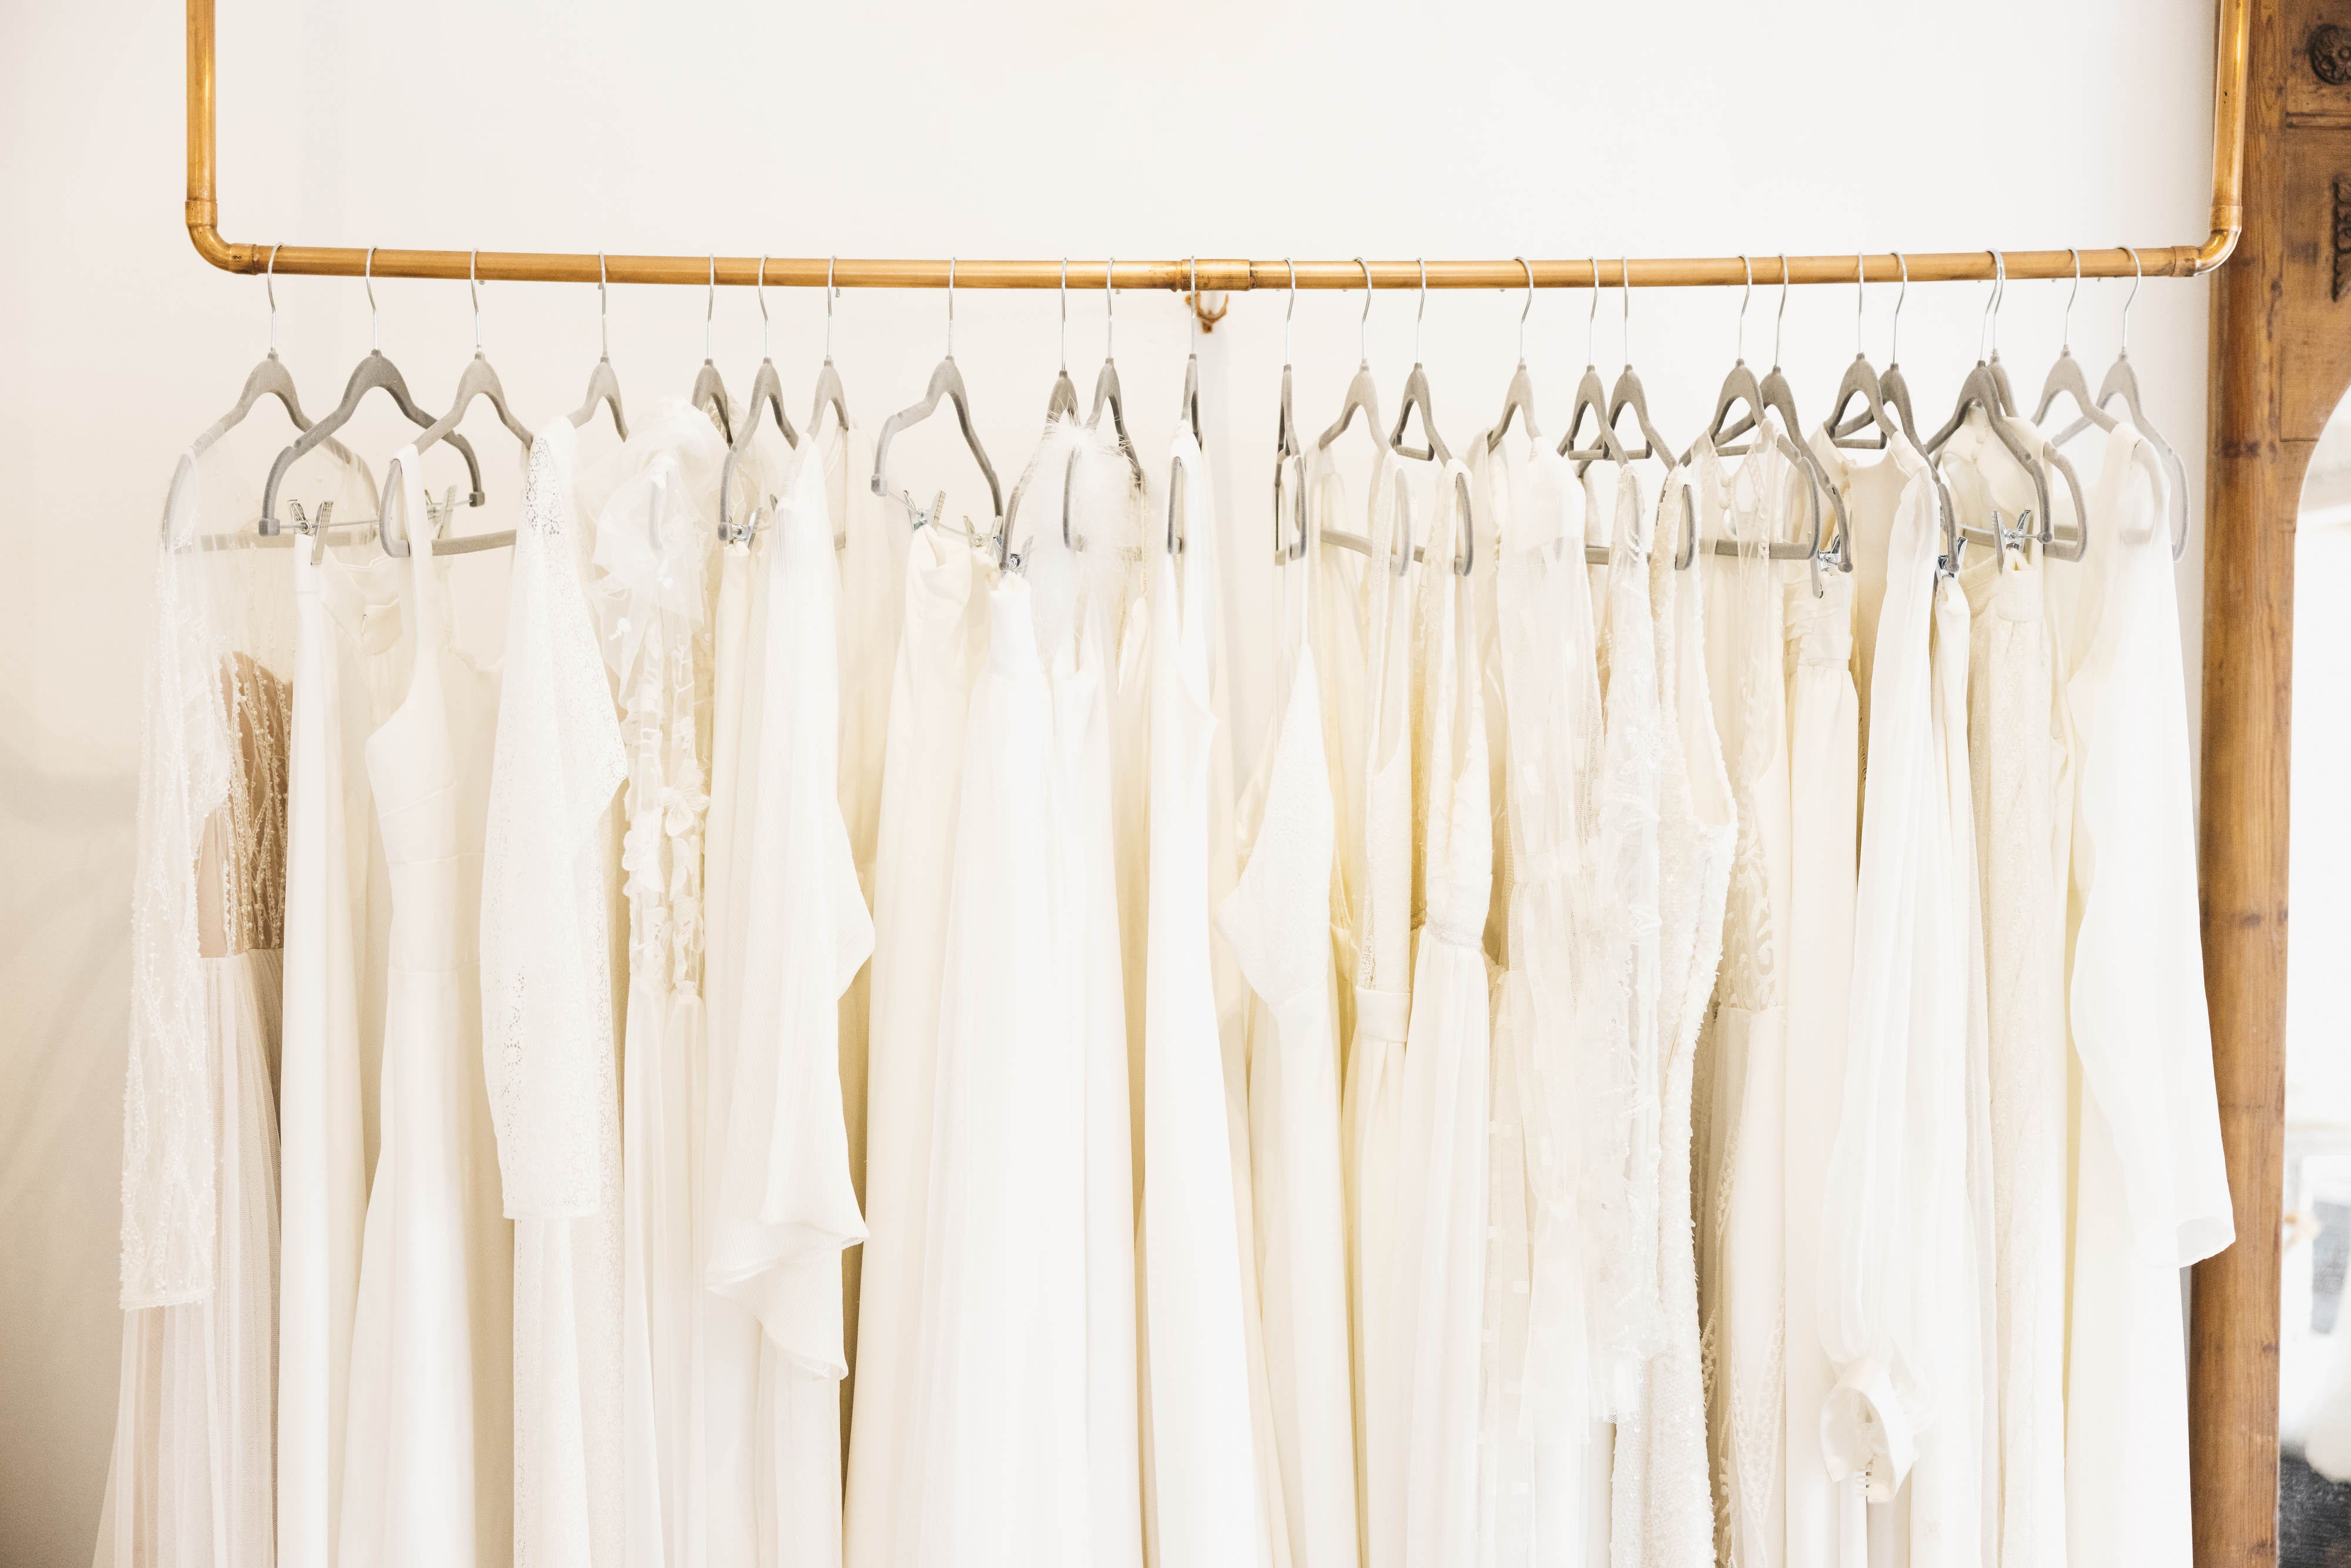 Clothing rack displaying a variety of elegant white wedding dresses hung on hangers. No people or specific text visible in the image